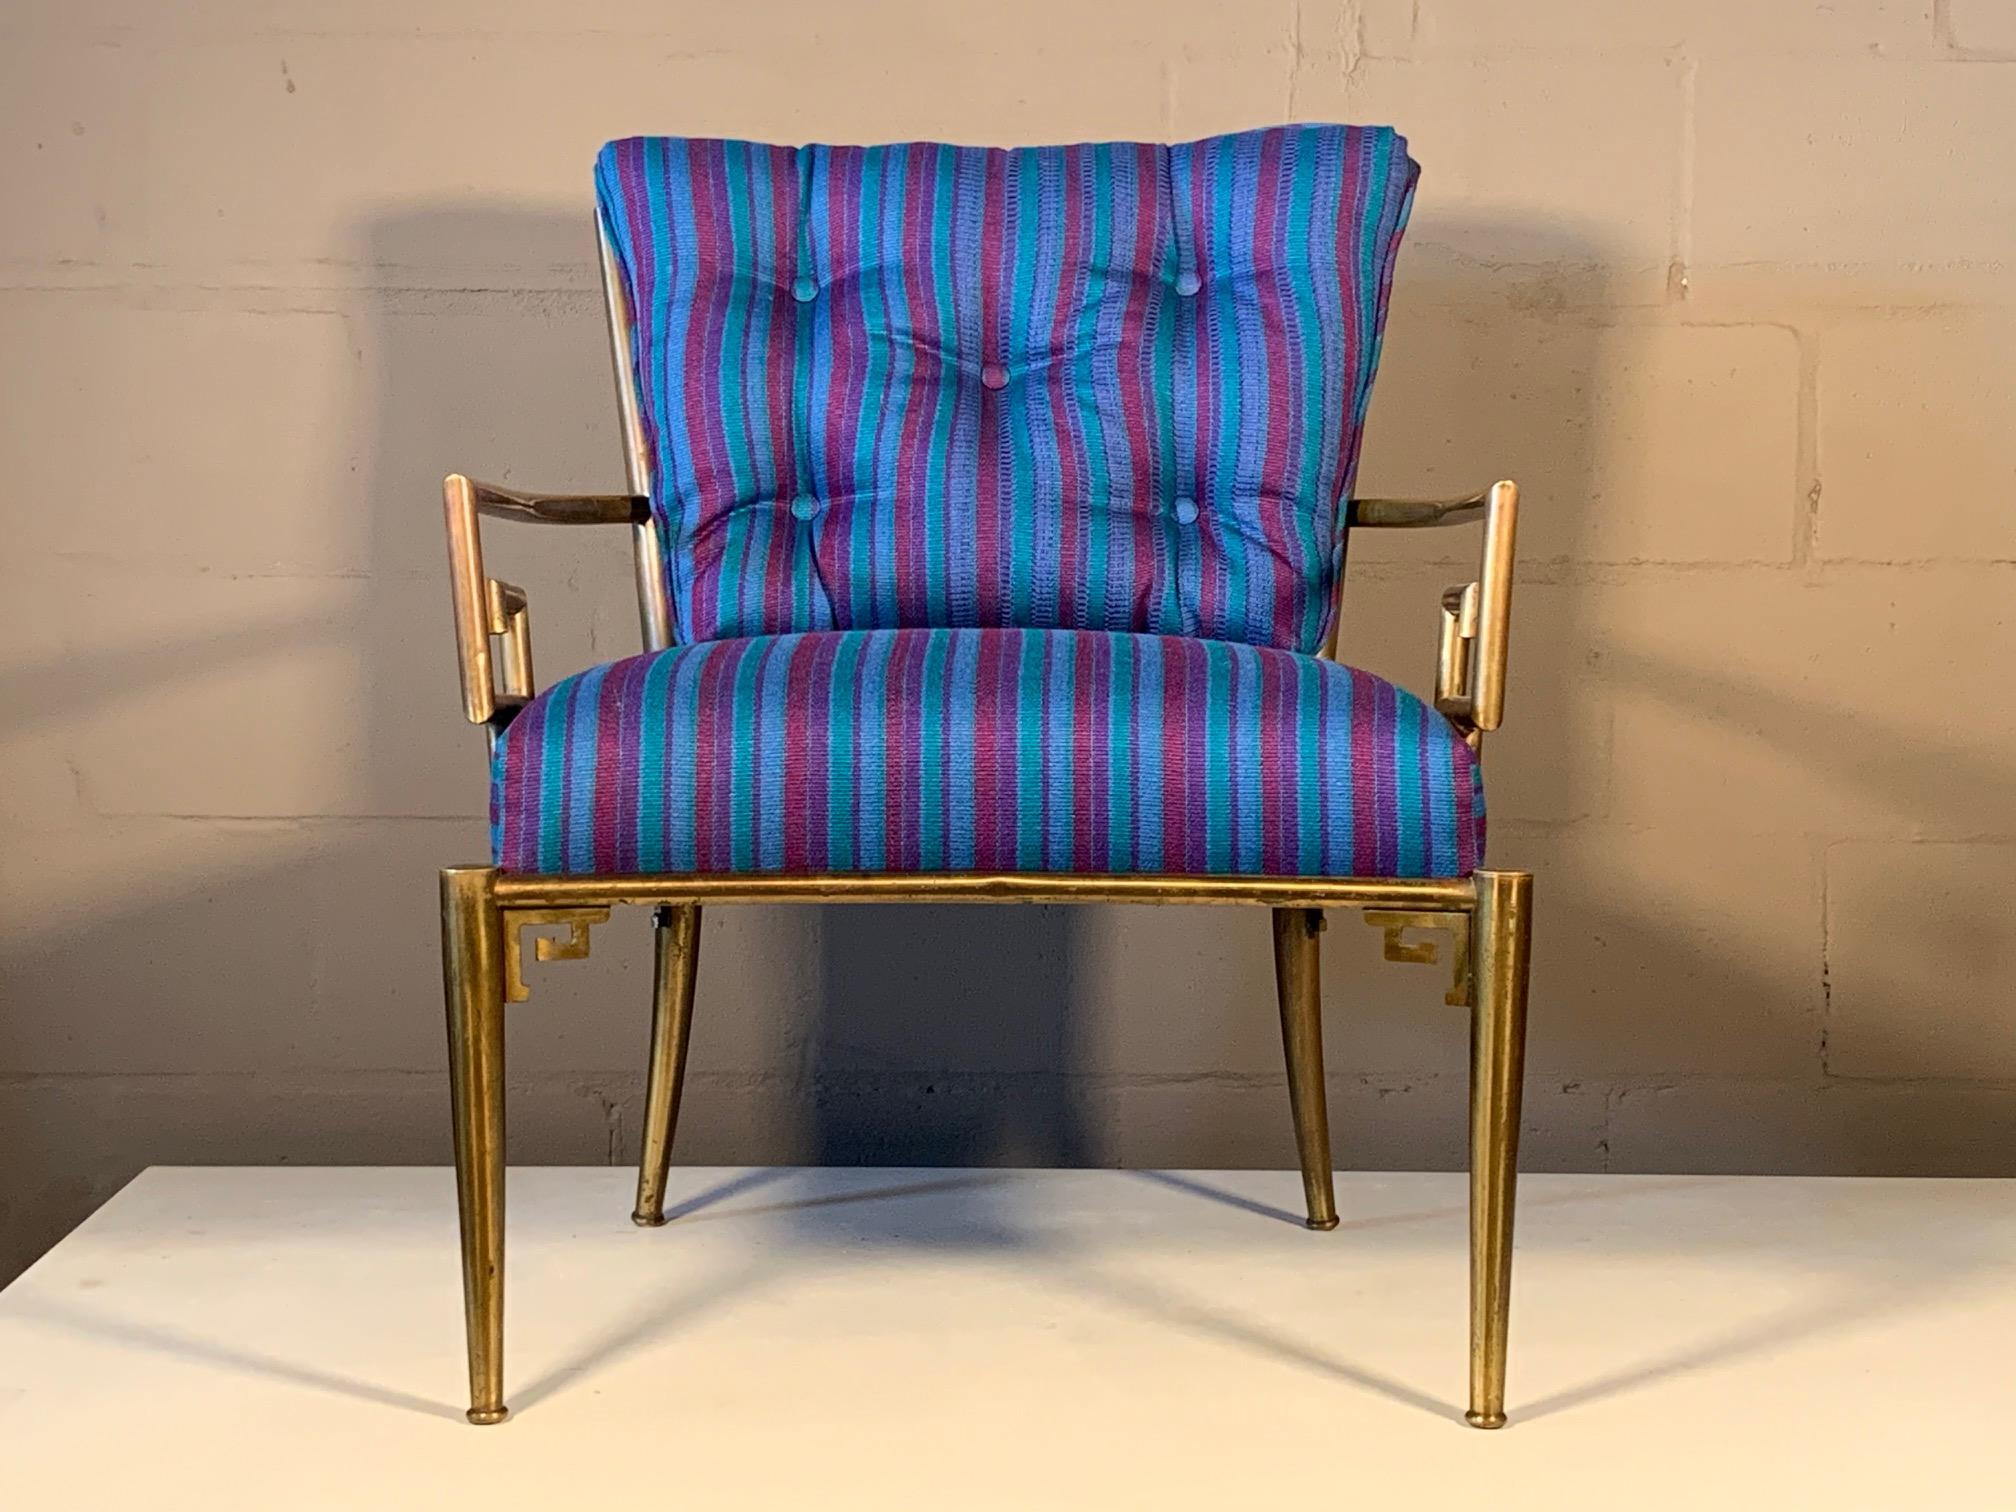 A classic Greek key armchair, made in Italy and distributed by Mastercraft. Made of brass with a curved back, the chair is stylish and very comfortable. Brass frame has patina, upholstery has been redone.